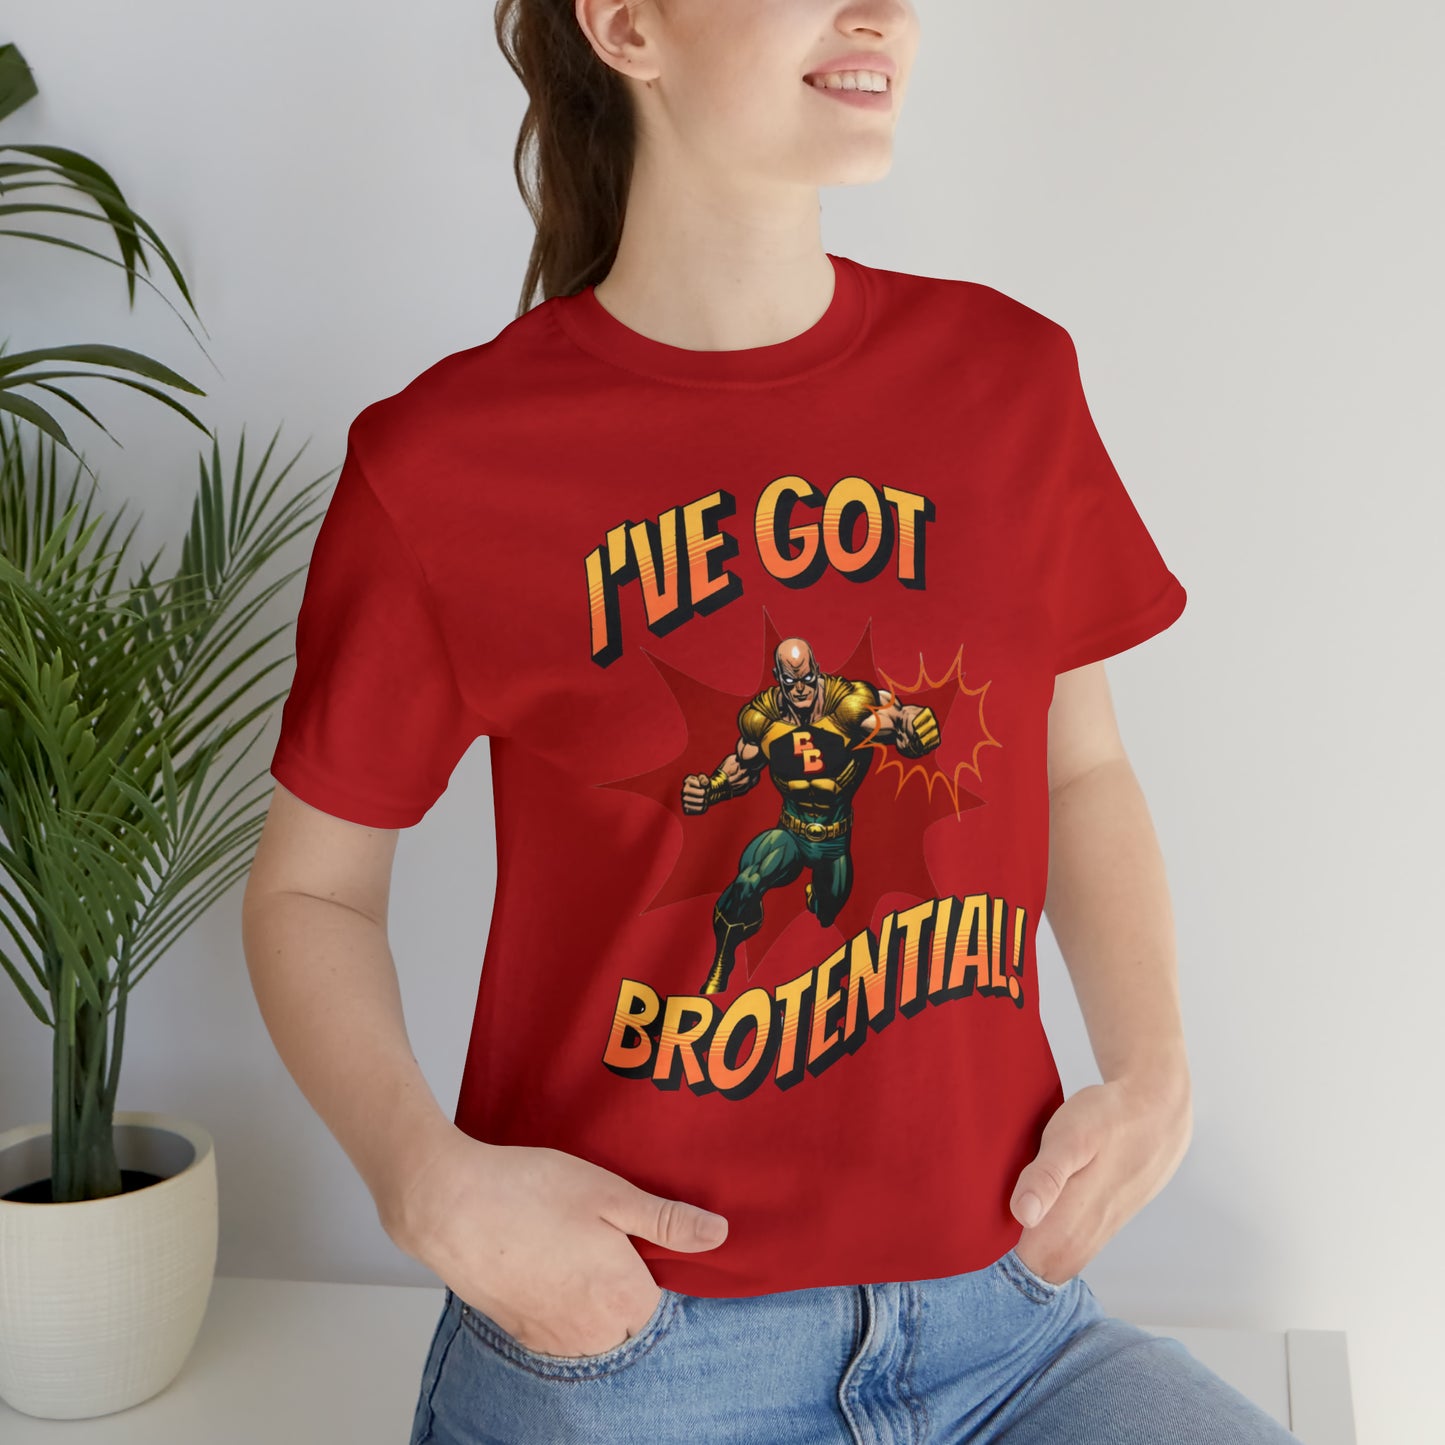 I've Got Brotential Unisex #1 Jersey Short Sleeve Tee,  Unisex Motivational Top, Trendy Graphic Tshirt, Gift for Gym Enthusiasts, Positive Image Shirt, Cool Urban Wear